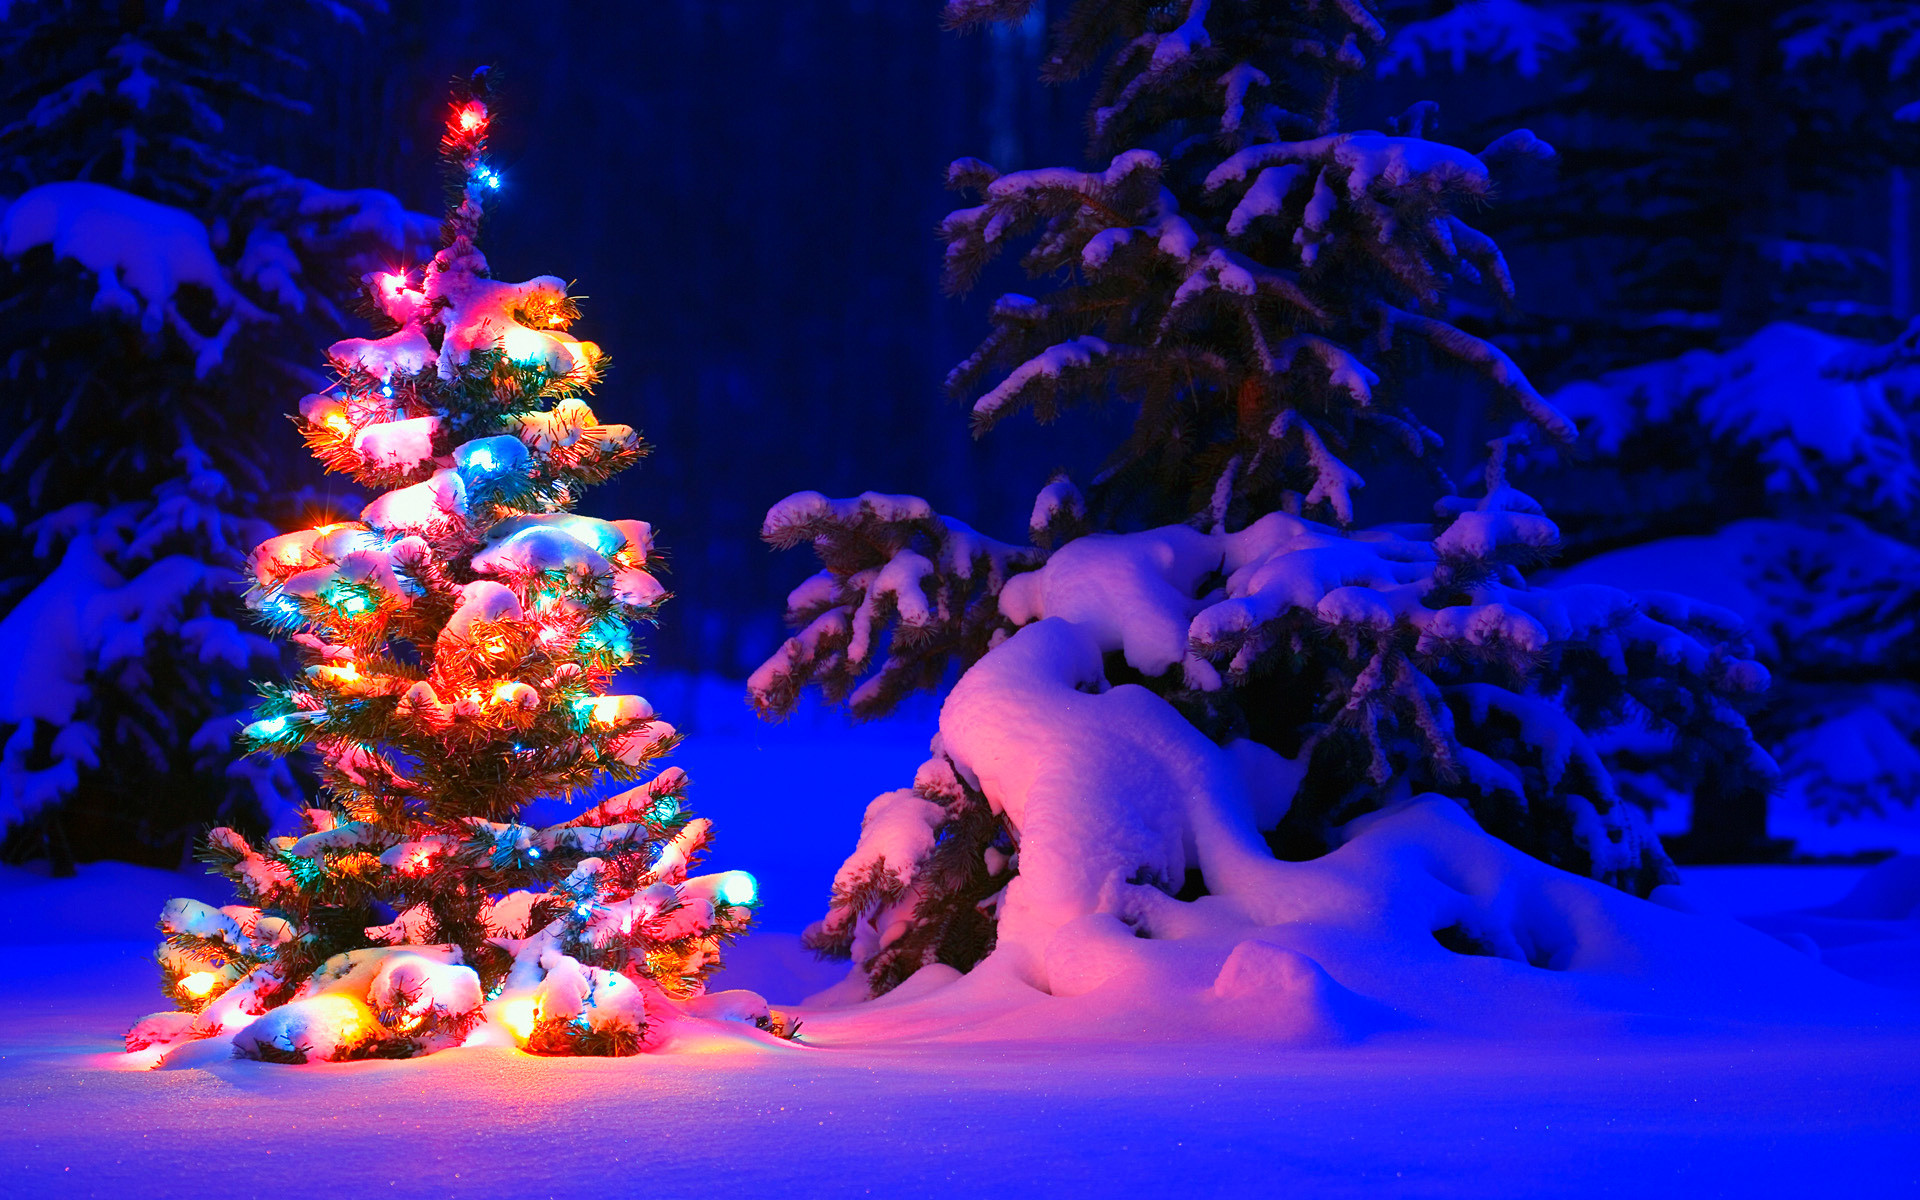 HD Christmas Desktop Background The Best Image In